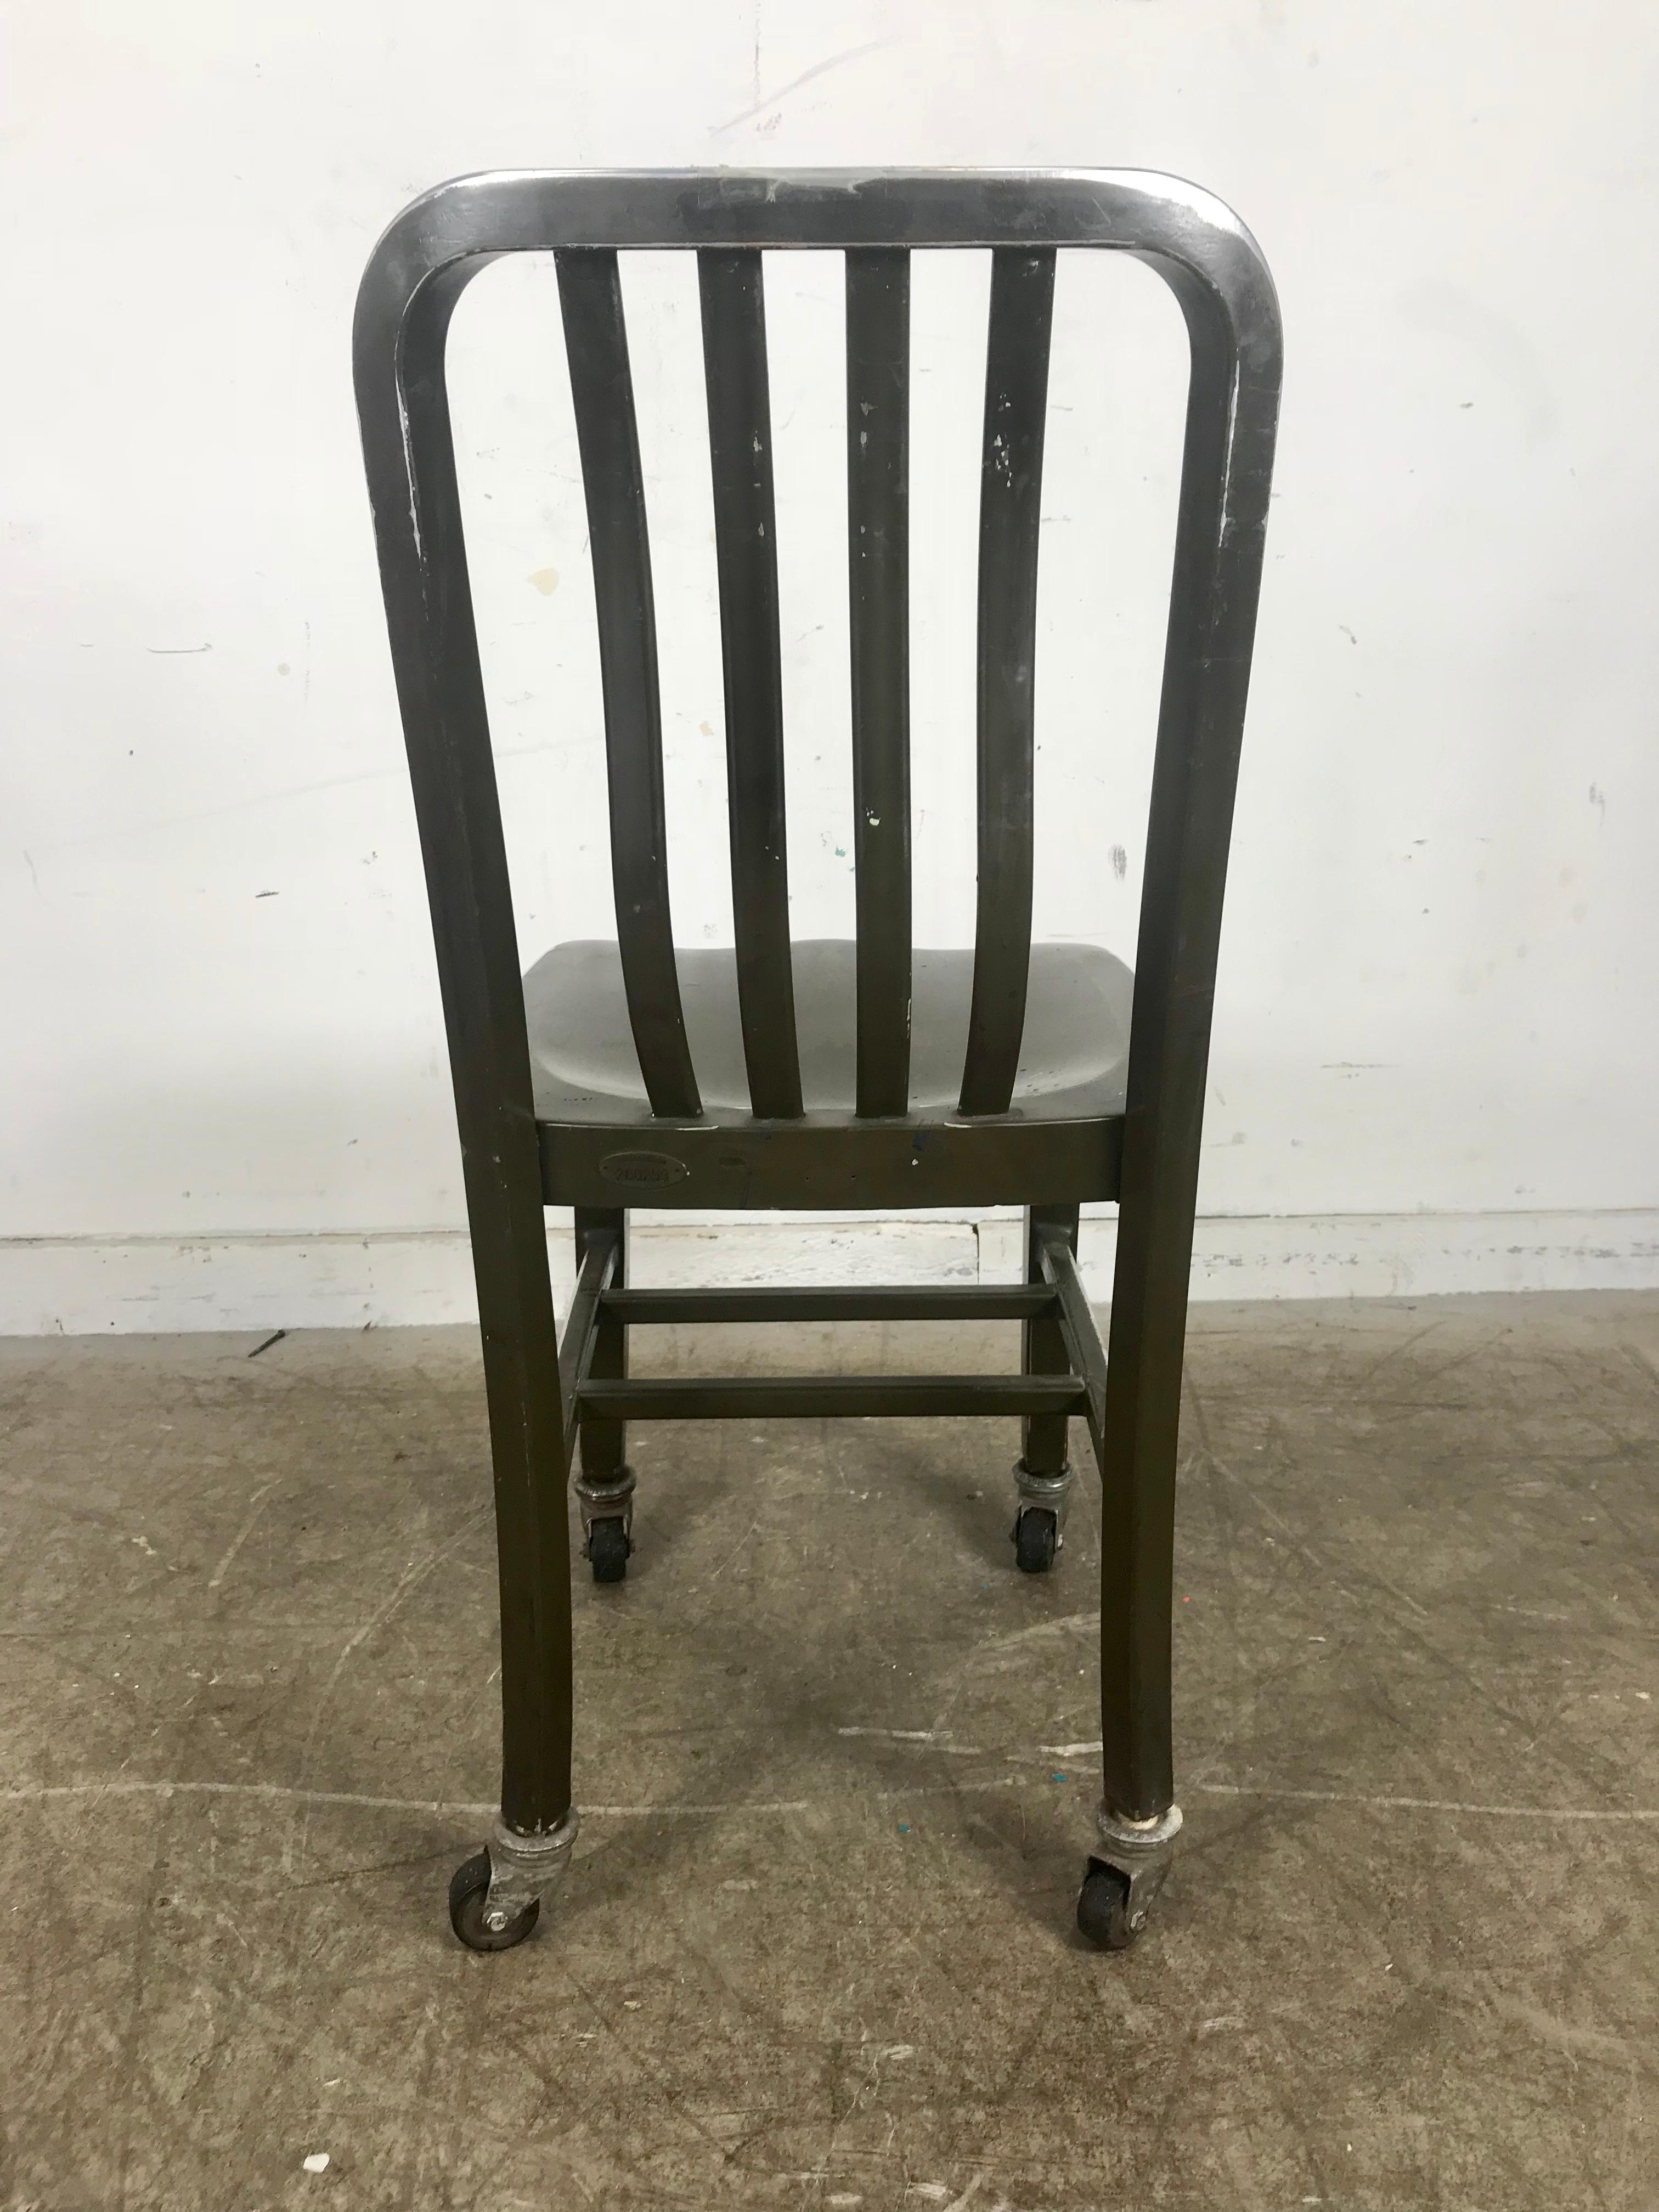 Mid-20th Century Antique Industrial Aluminum Rolling Desk Chair by General Fireproofing Co. For Sale